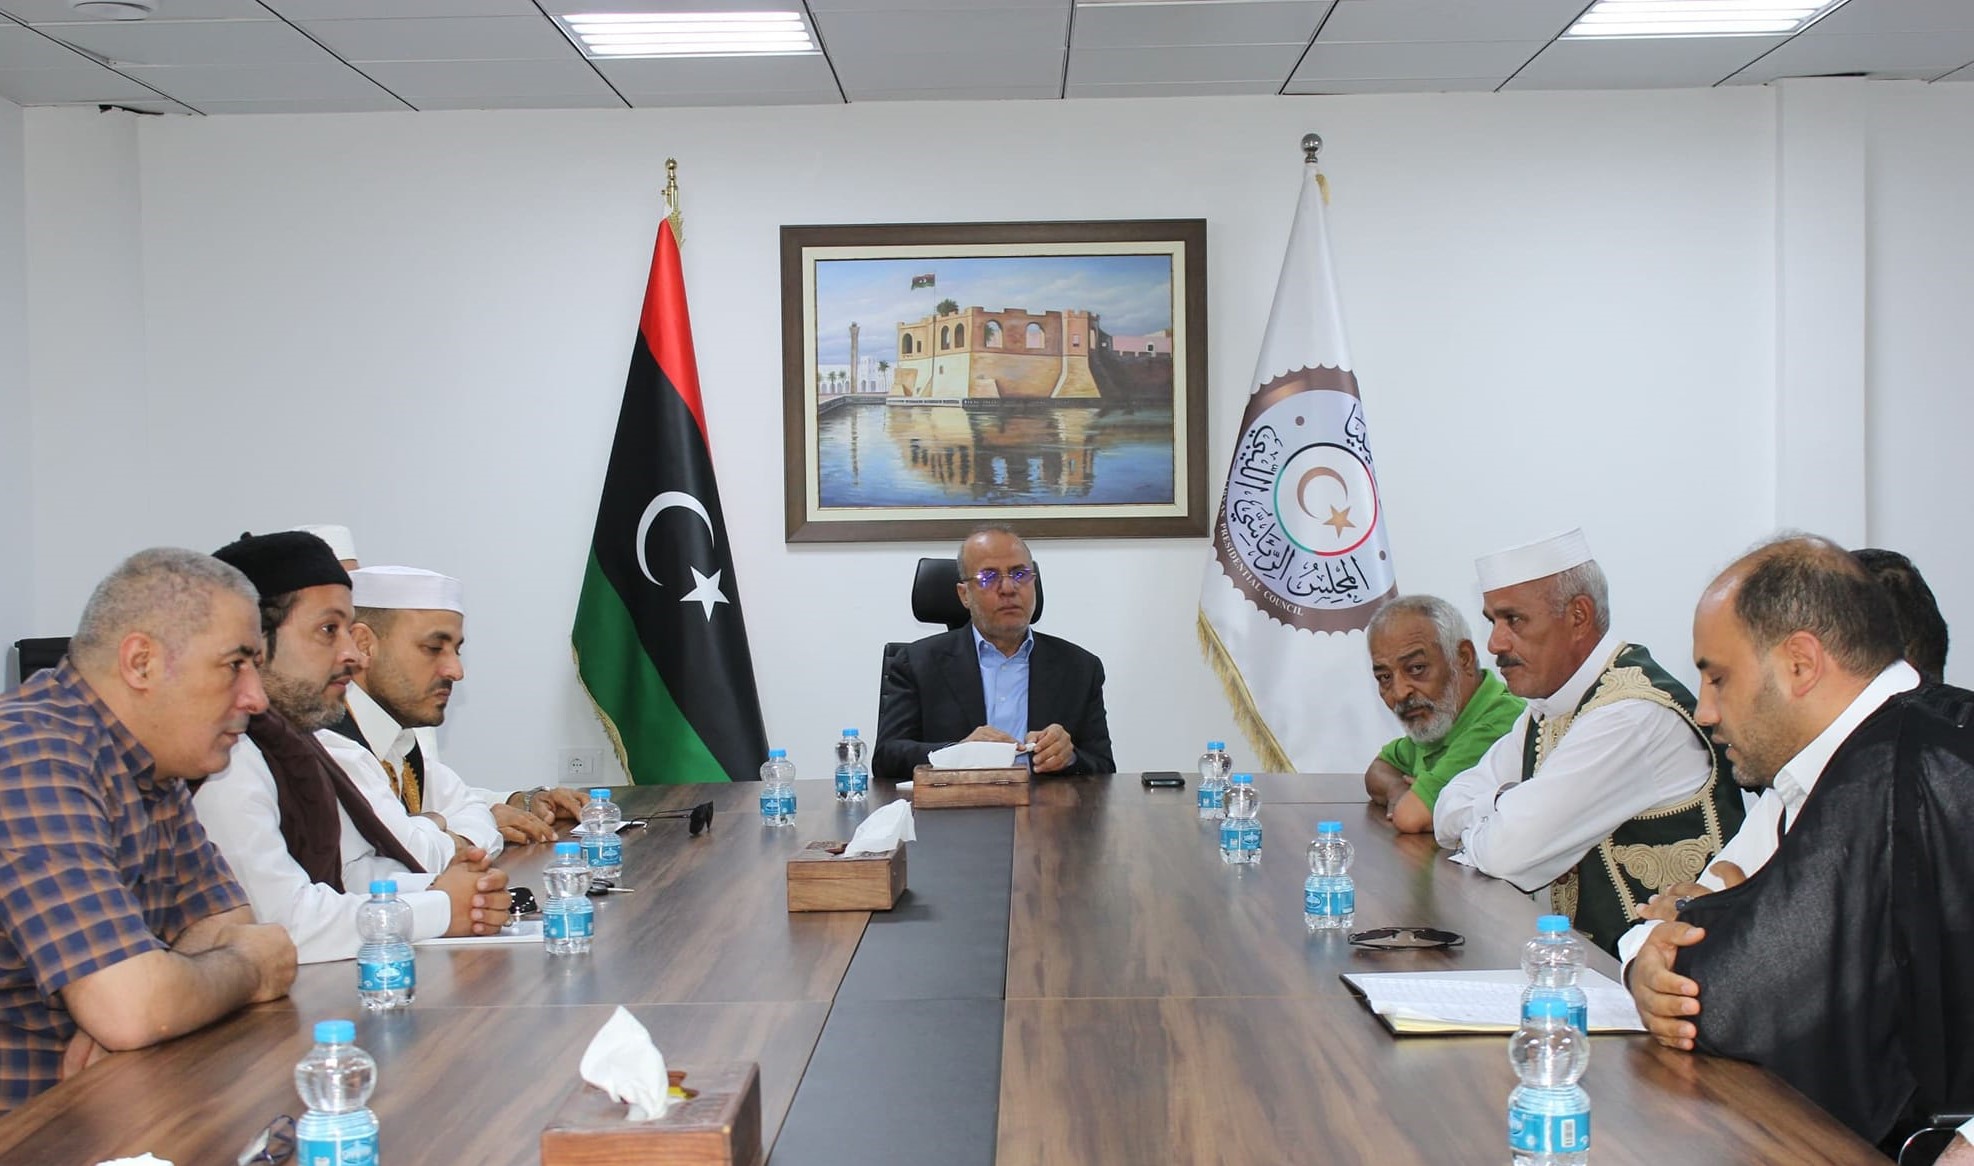 Al-Lafi discusses the reconciliation project with a delegation of notables and sheikhs of Bani Walid